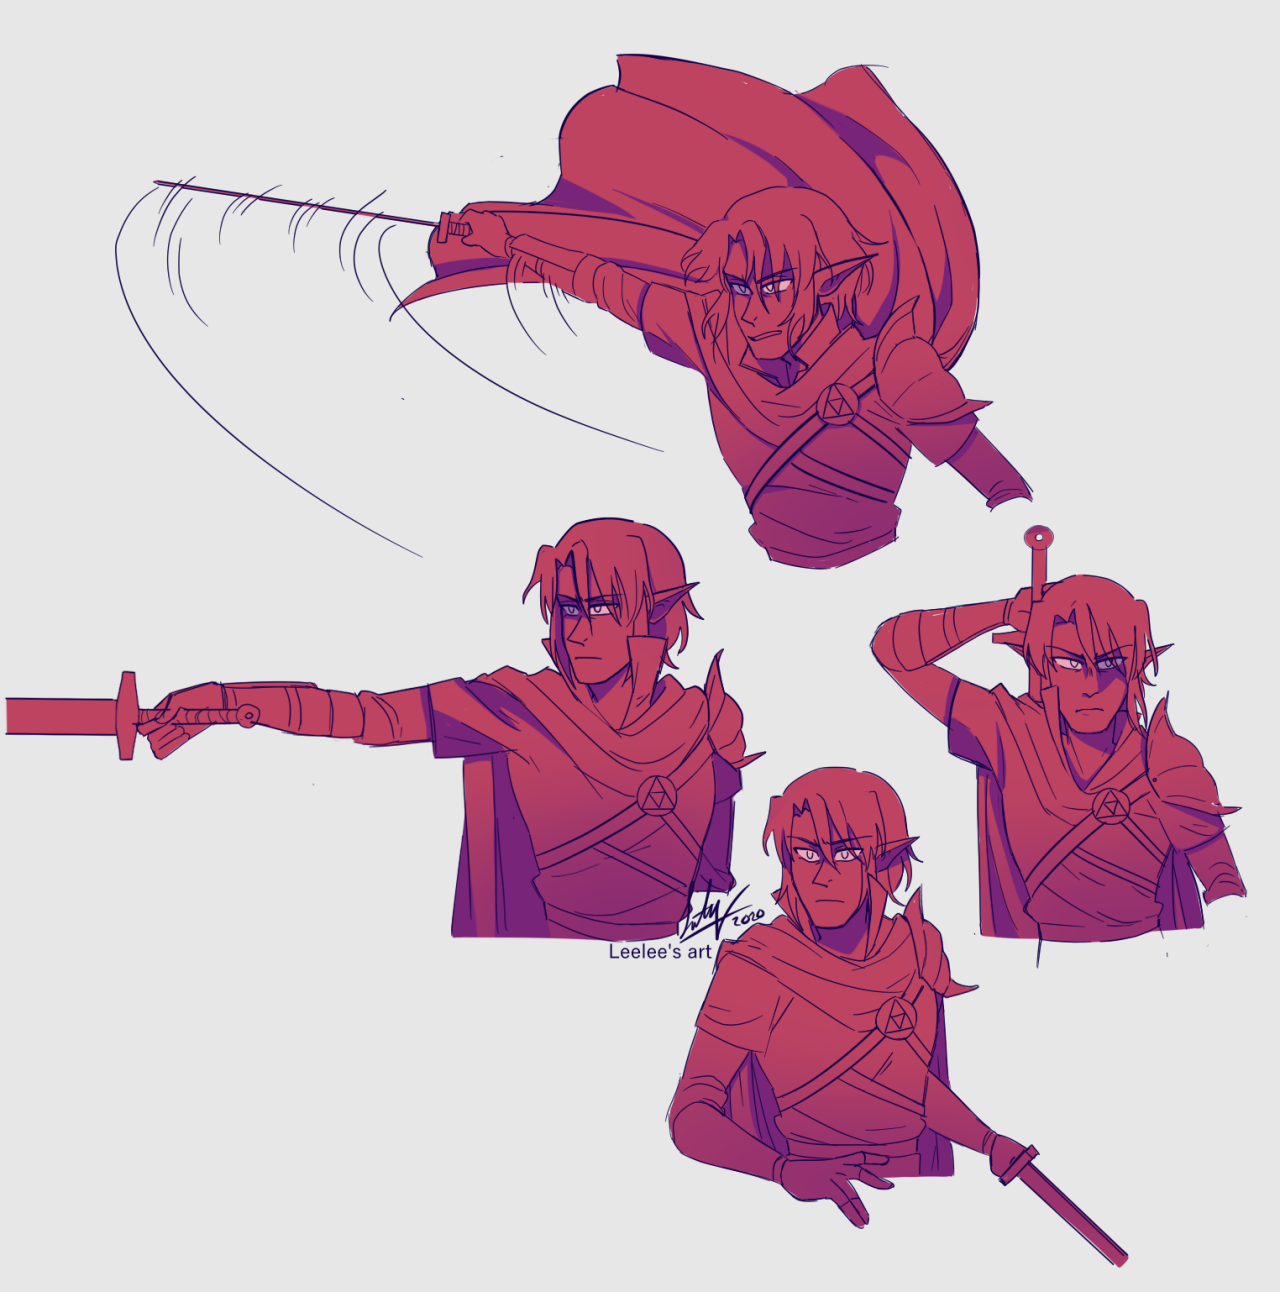 Four drawings of First in various poses from the waist-up.